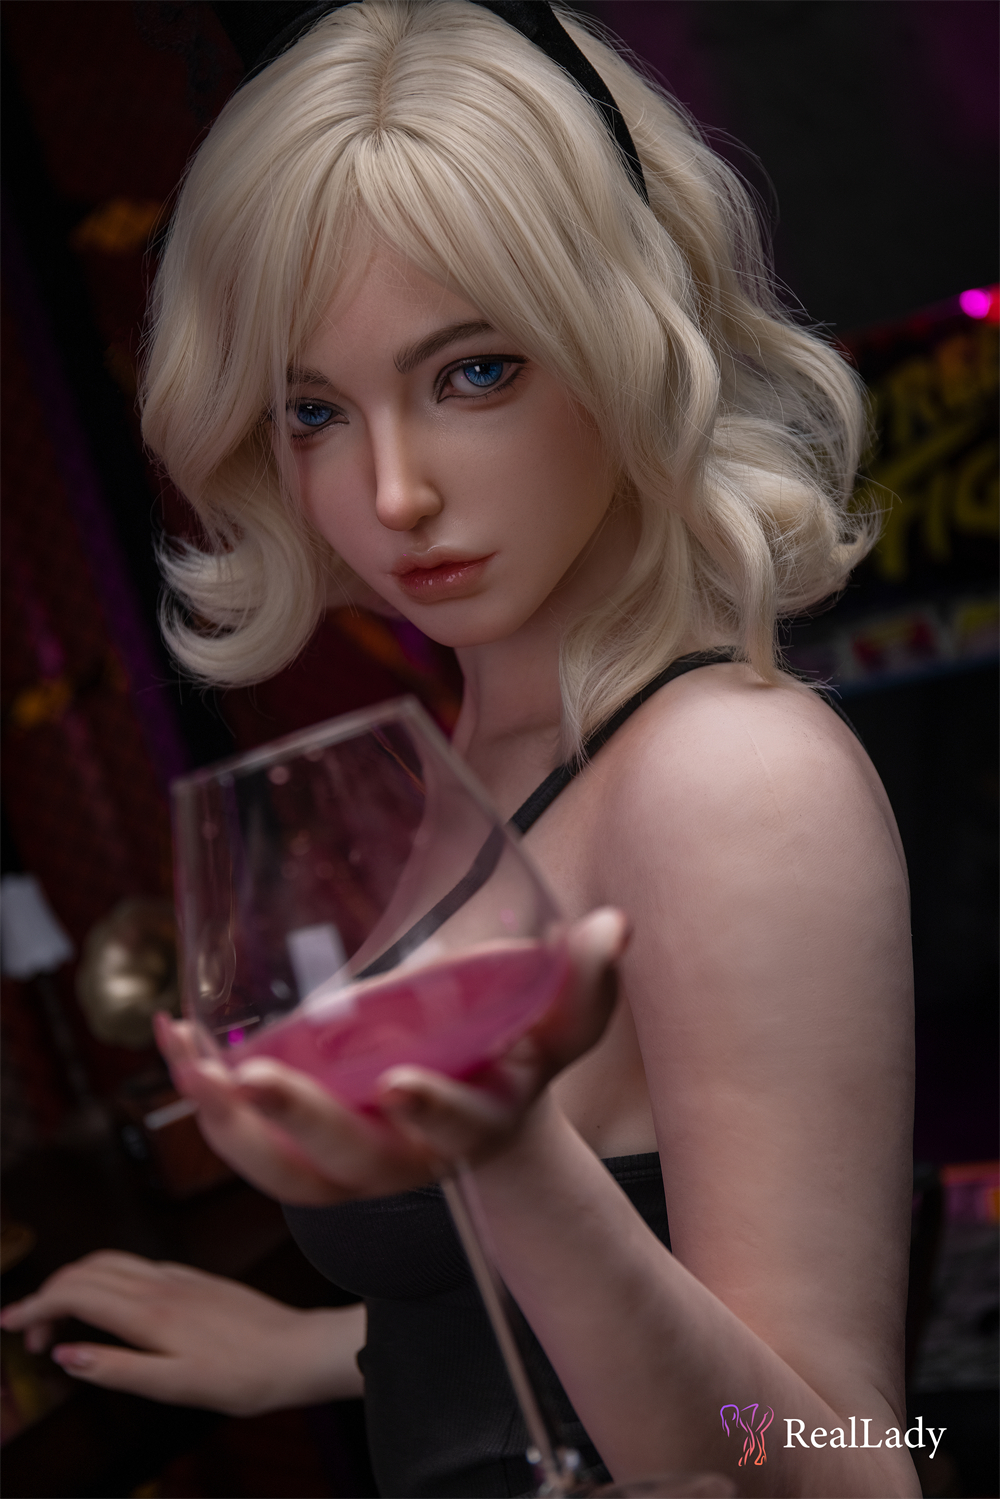 RealLady丨Kelly - 170cm/5Ft 7 S41 Real silicone sex doll